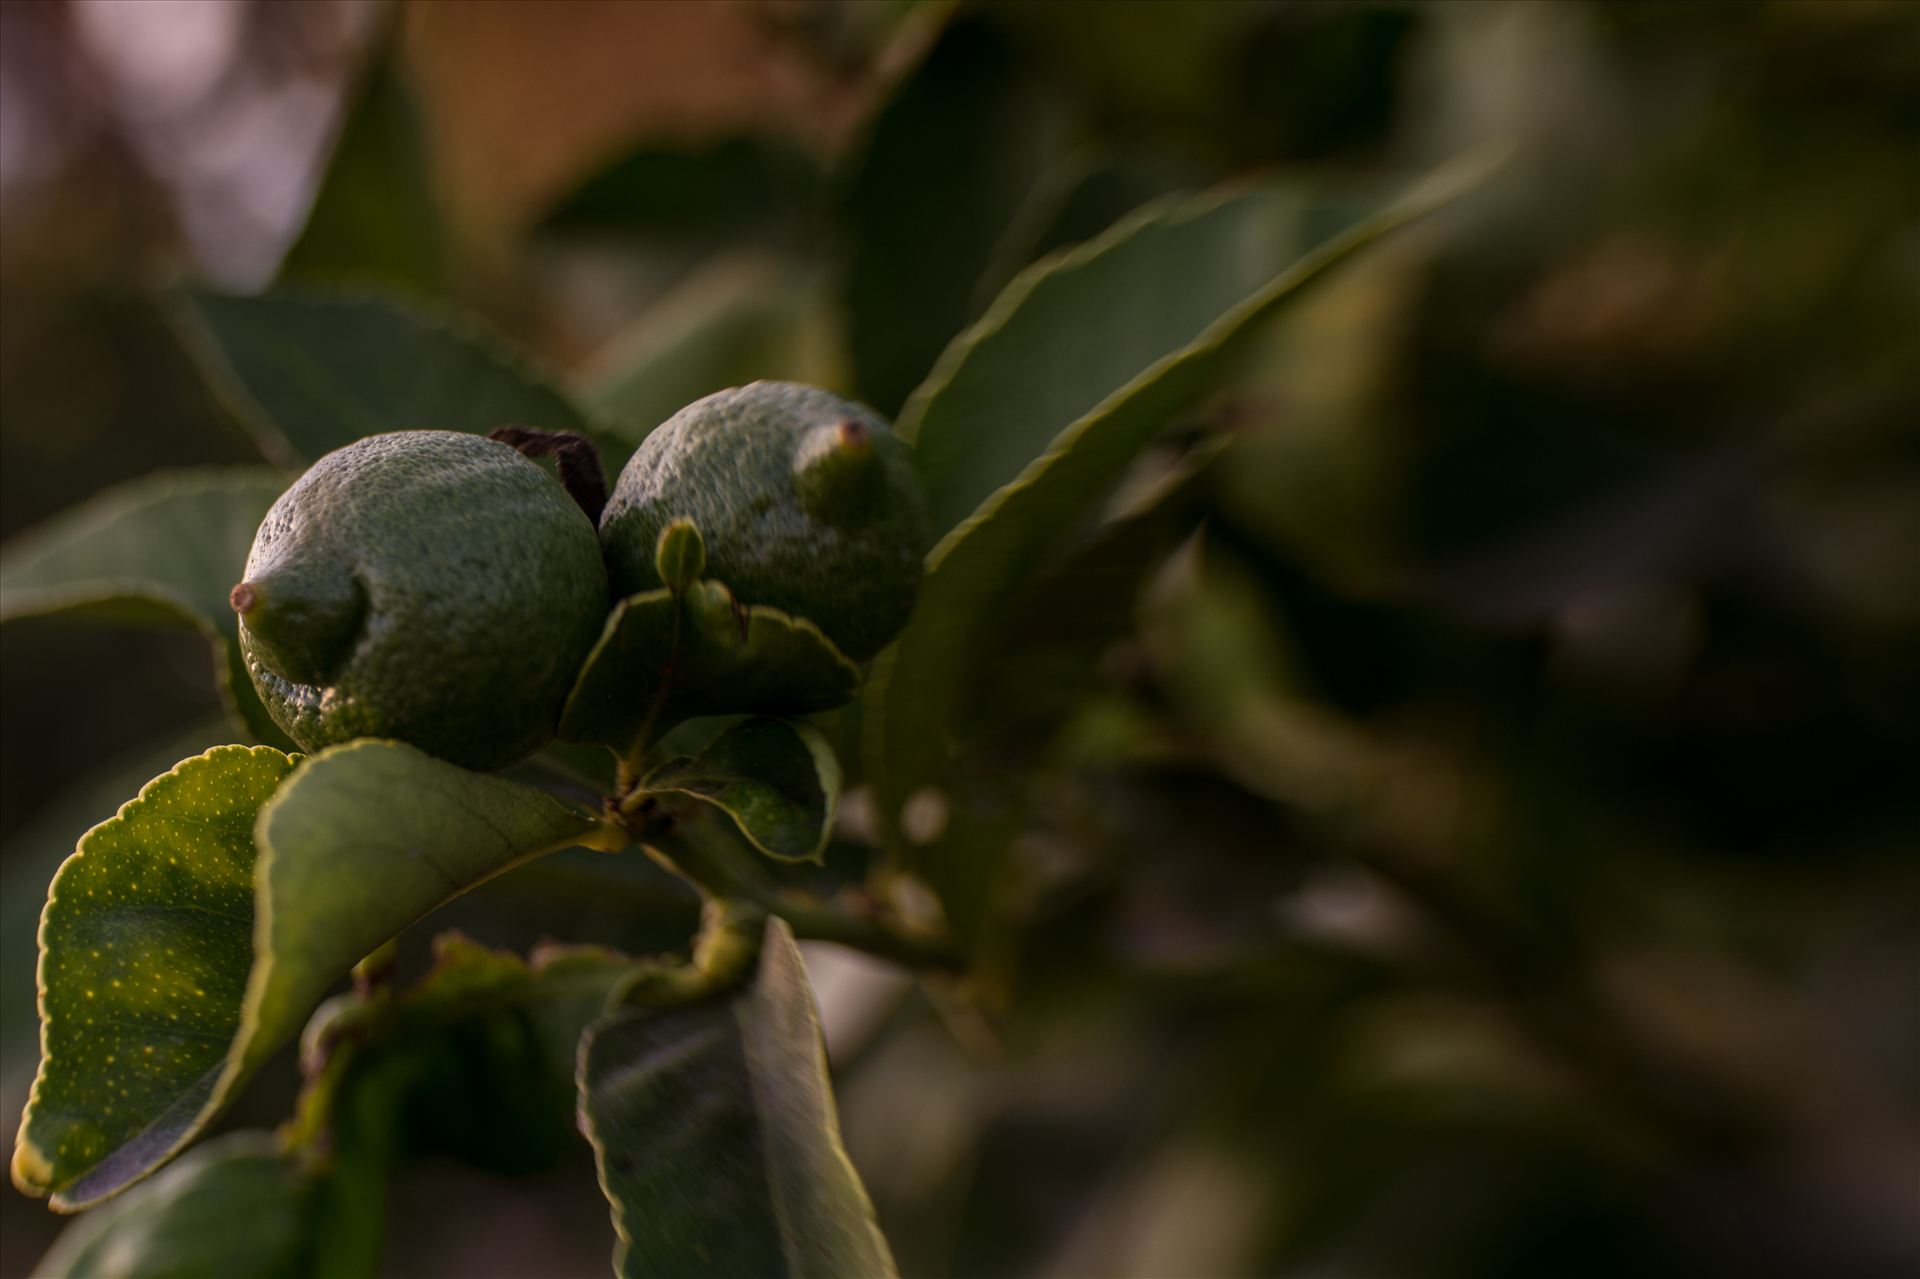 Lovely Limes 092615.jpg - Last of the limes in California in October by Sarah Williams